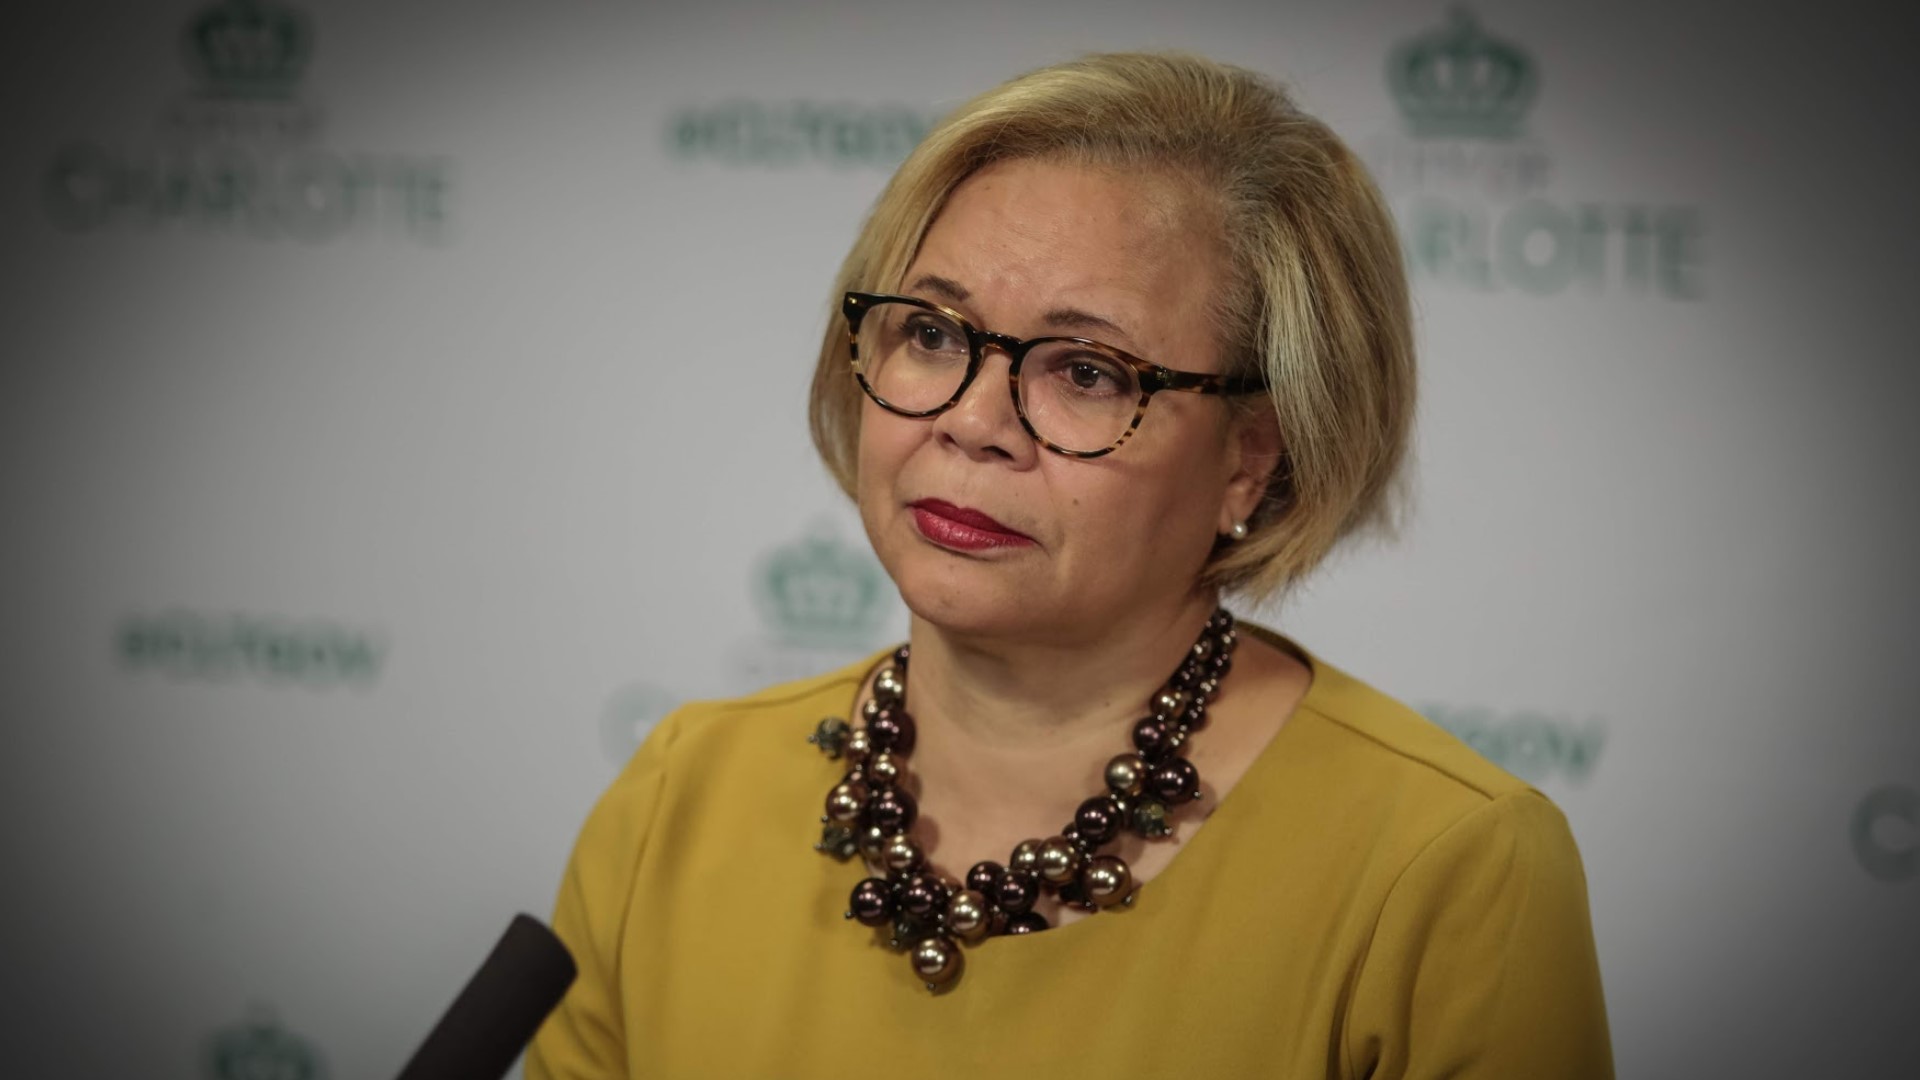 During an interview on WCNC Charlotte's Flashpoint, Mayor Vi Lyles refused to confirm or deny she plans to seek a third term in office.